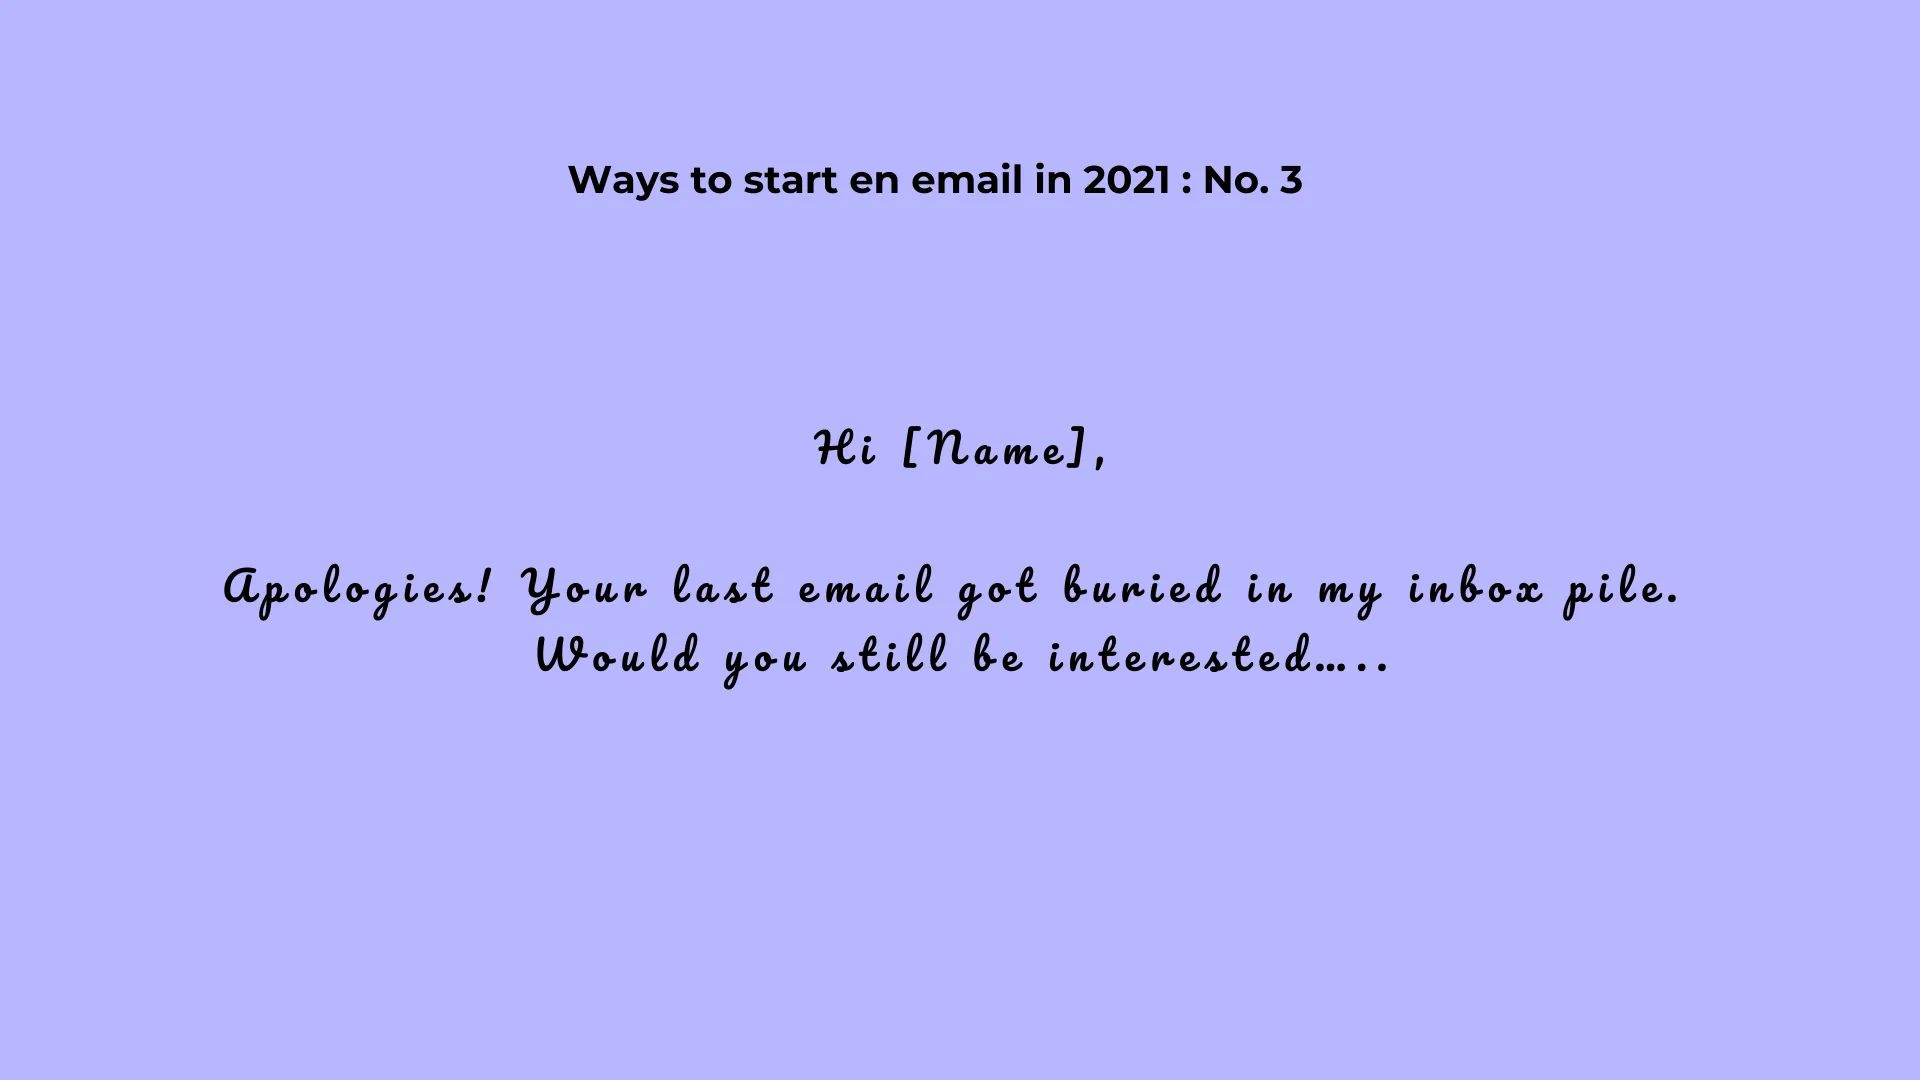 way-3-ways-to-start-an-email-in-2021